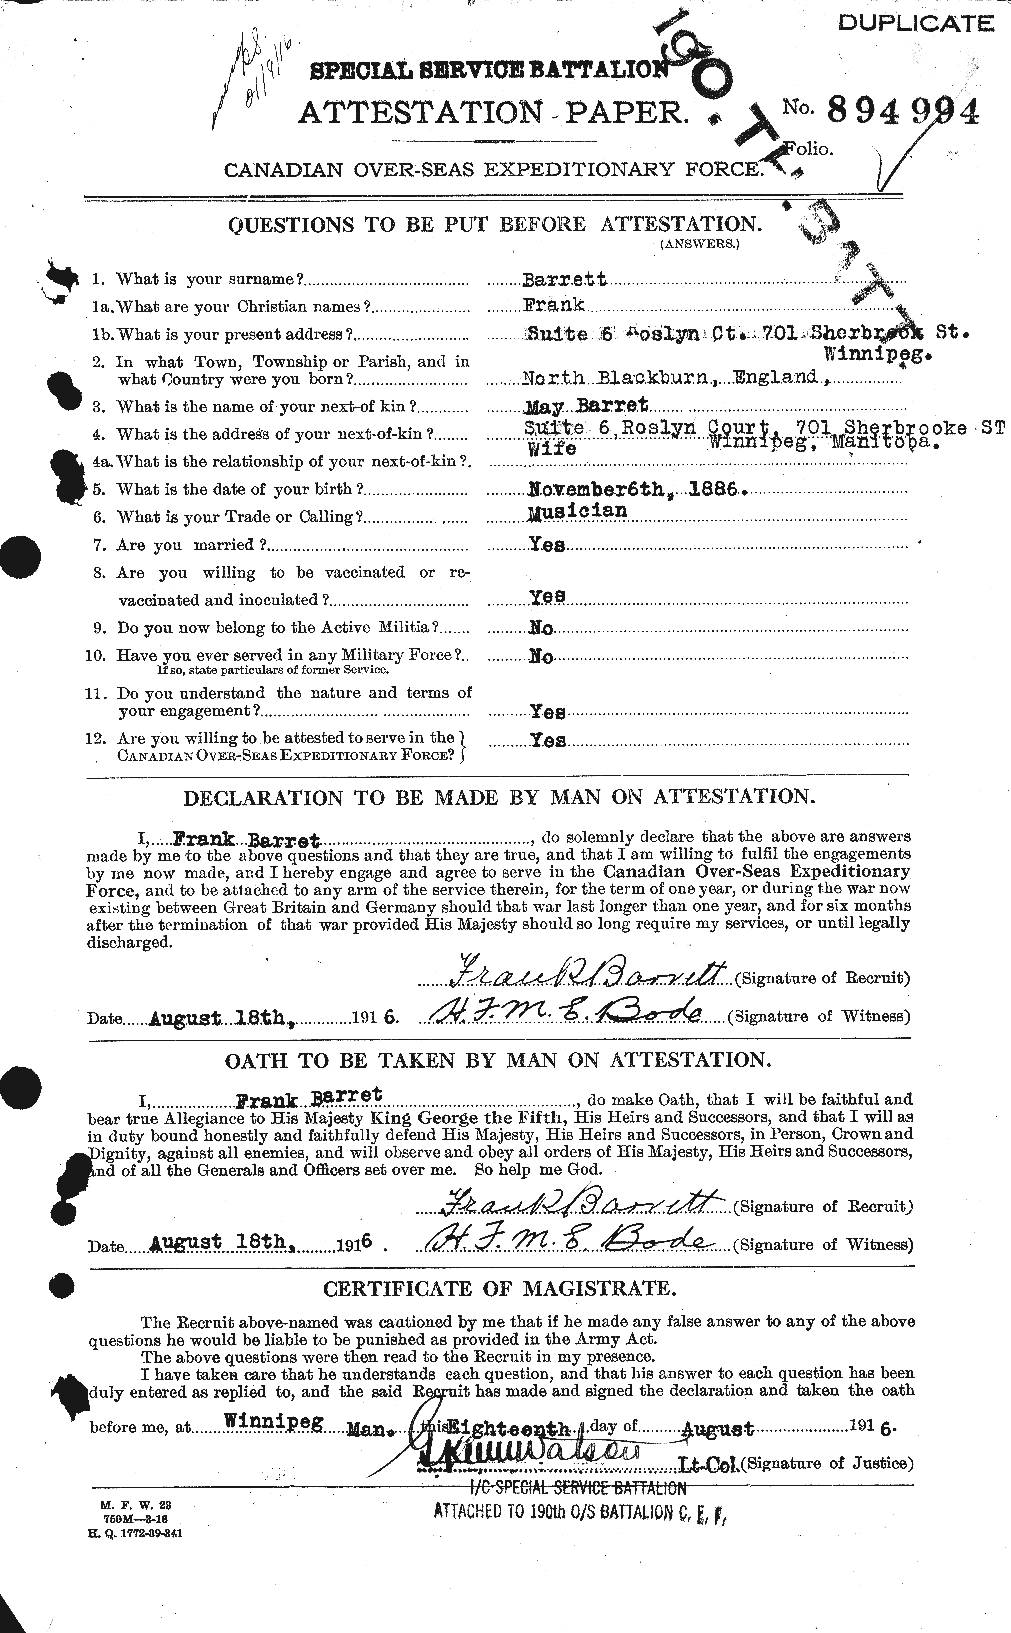 Personnel Records of the First World War - CEF 220341a